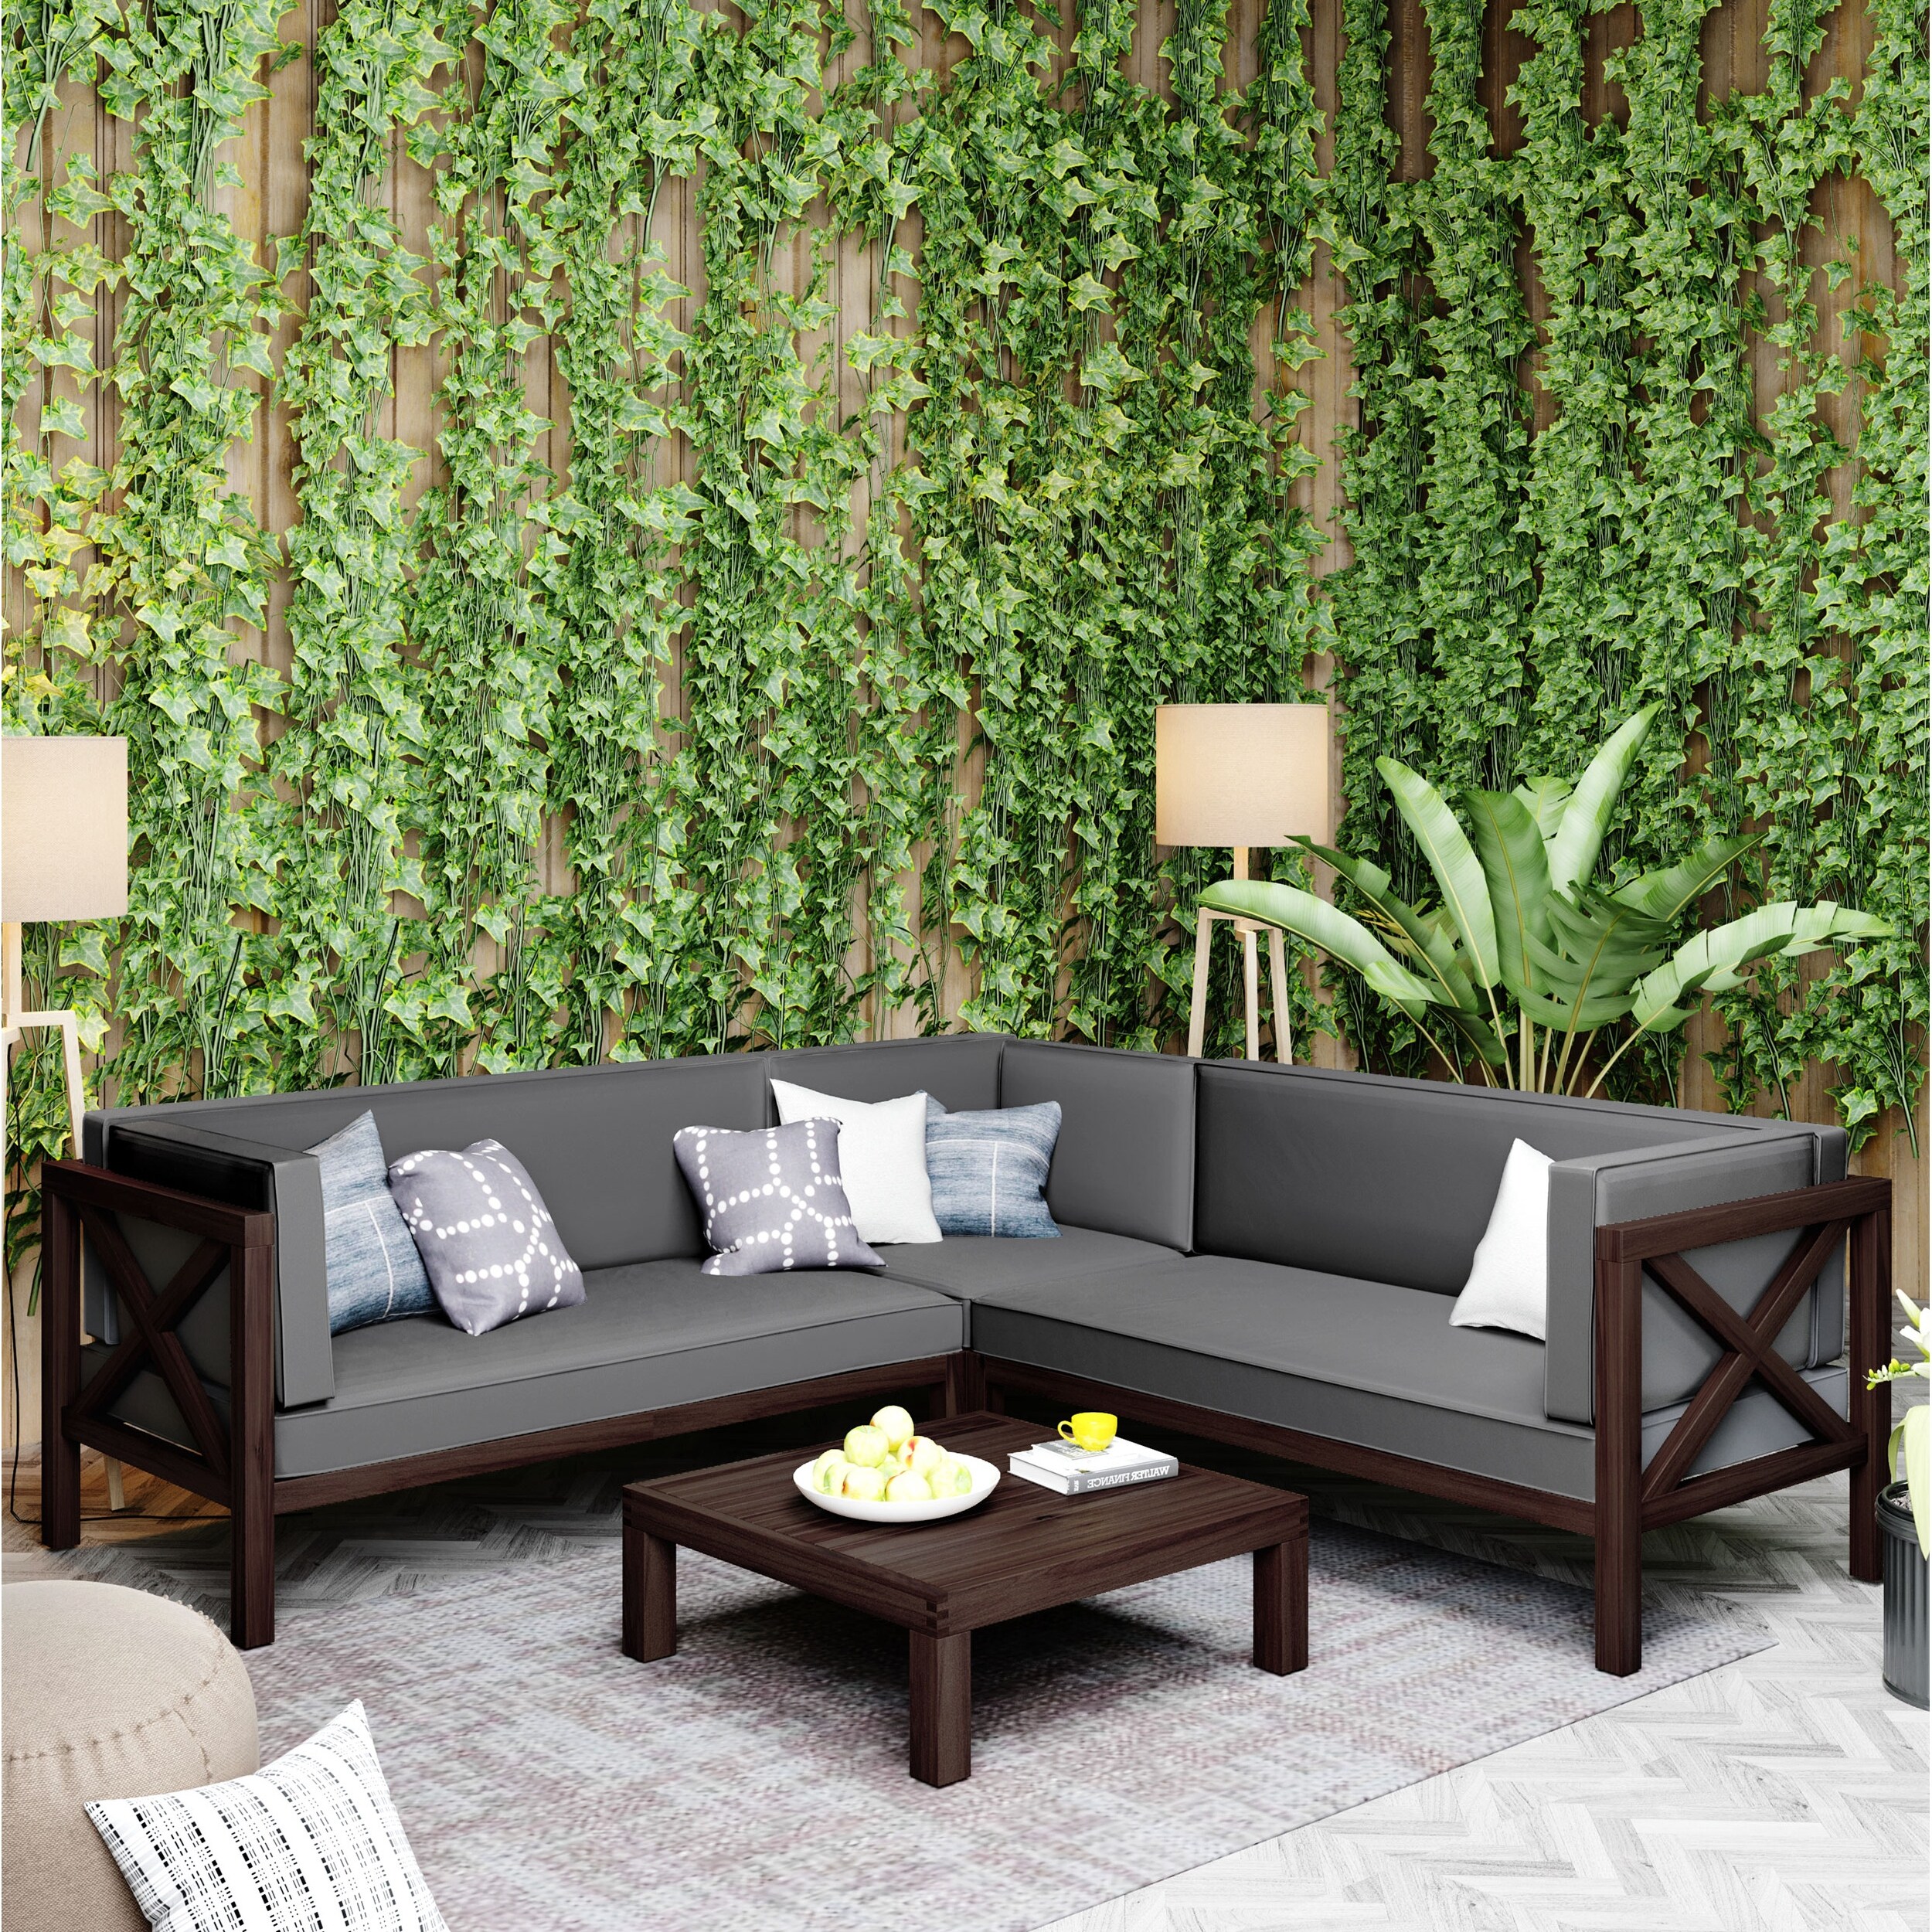 4 Pieces Outdoor Corner Design Patio Sectional Sofa Set  Featuring Wooden X-back Frames And Cushions  With Solid Wood Table